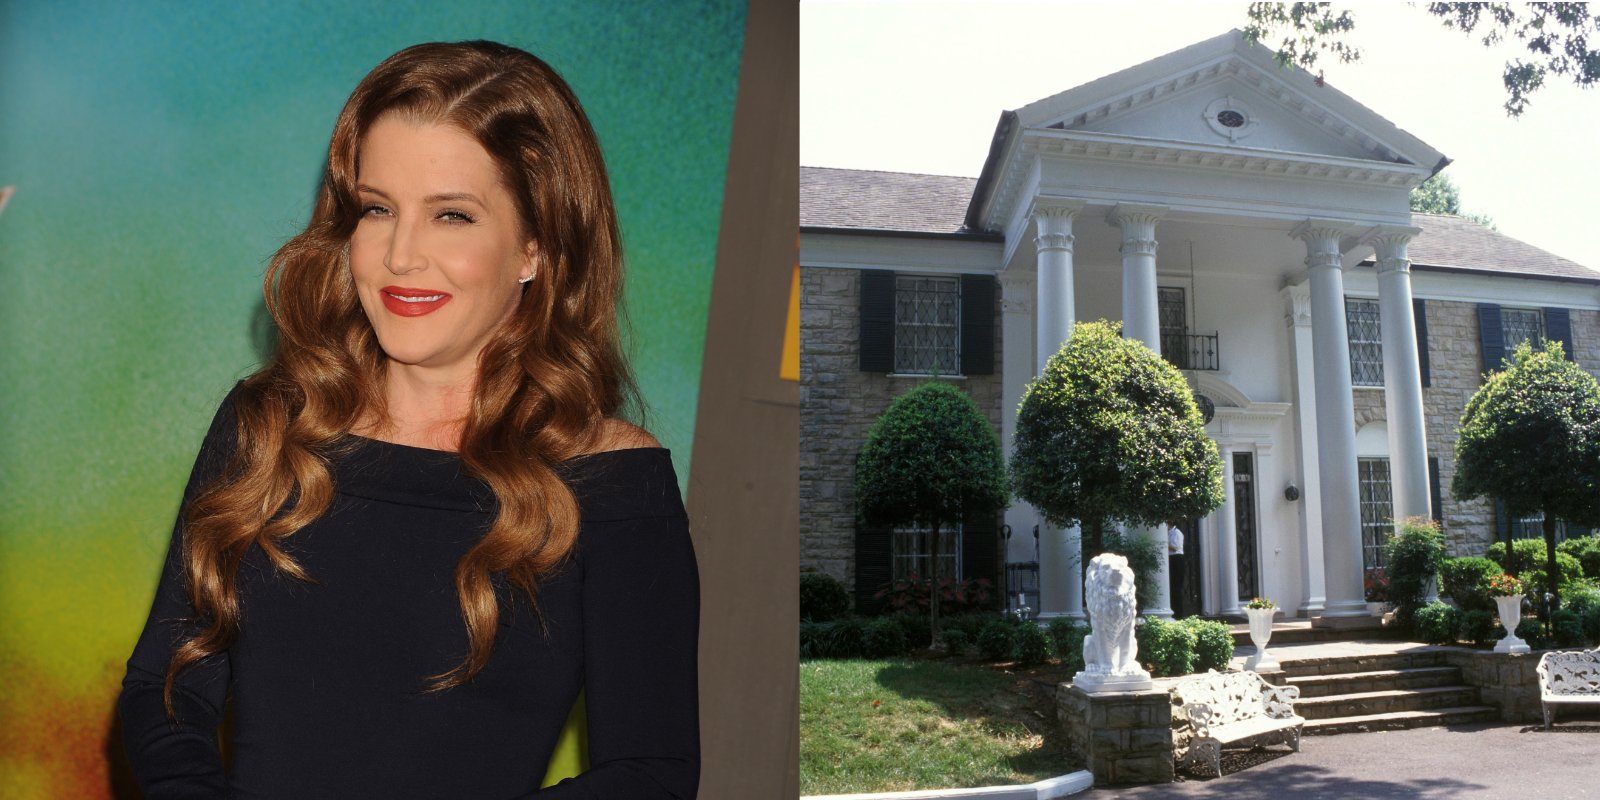 Lisa Marie Presley and a photo of Graceland mansion side by side.